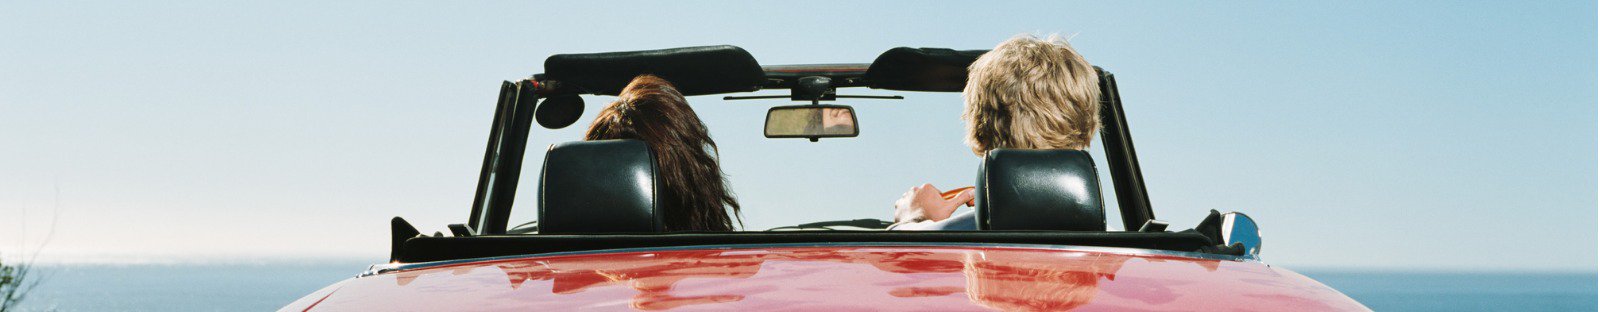 woman and man sitting in convertible car